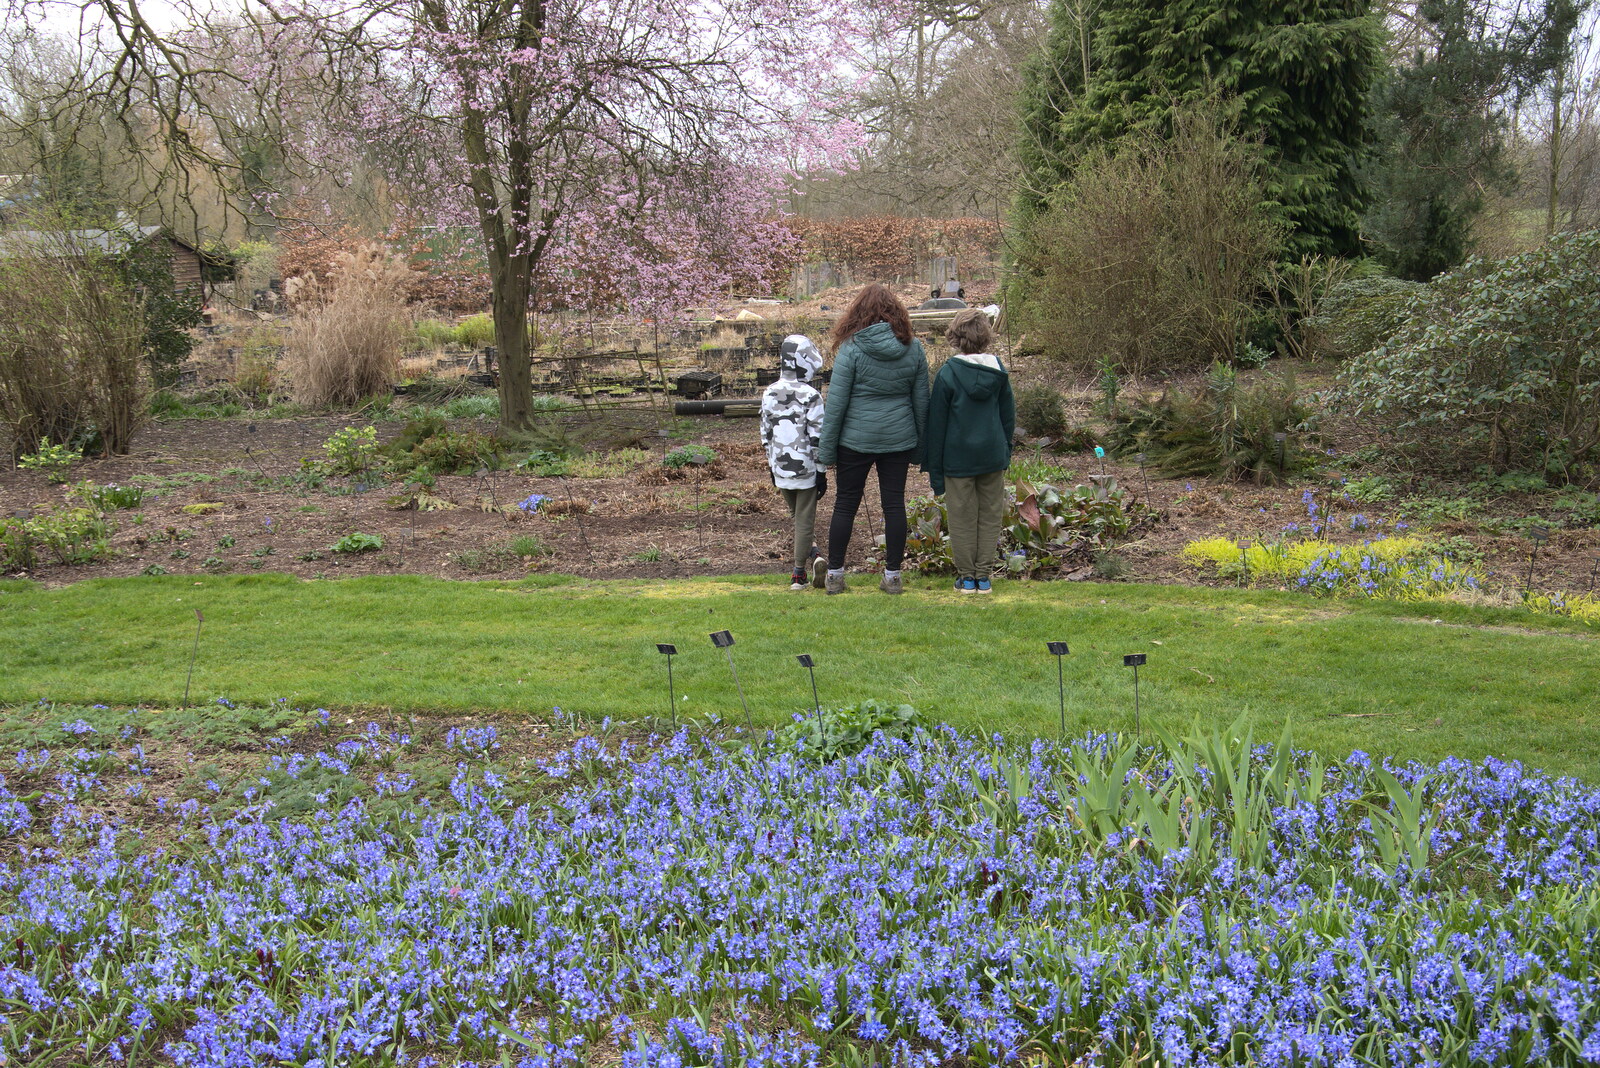 The gang look at some plants from A Return to Bressingham Steam and Gardens, Bressingham, Norfolk - 28th March 2021